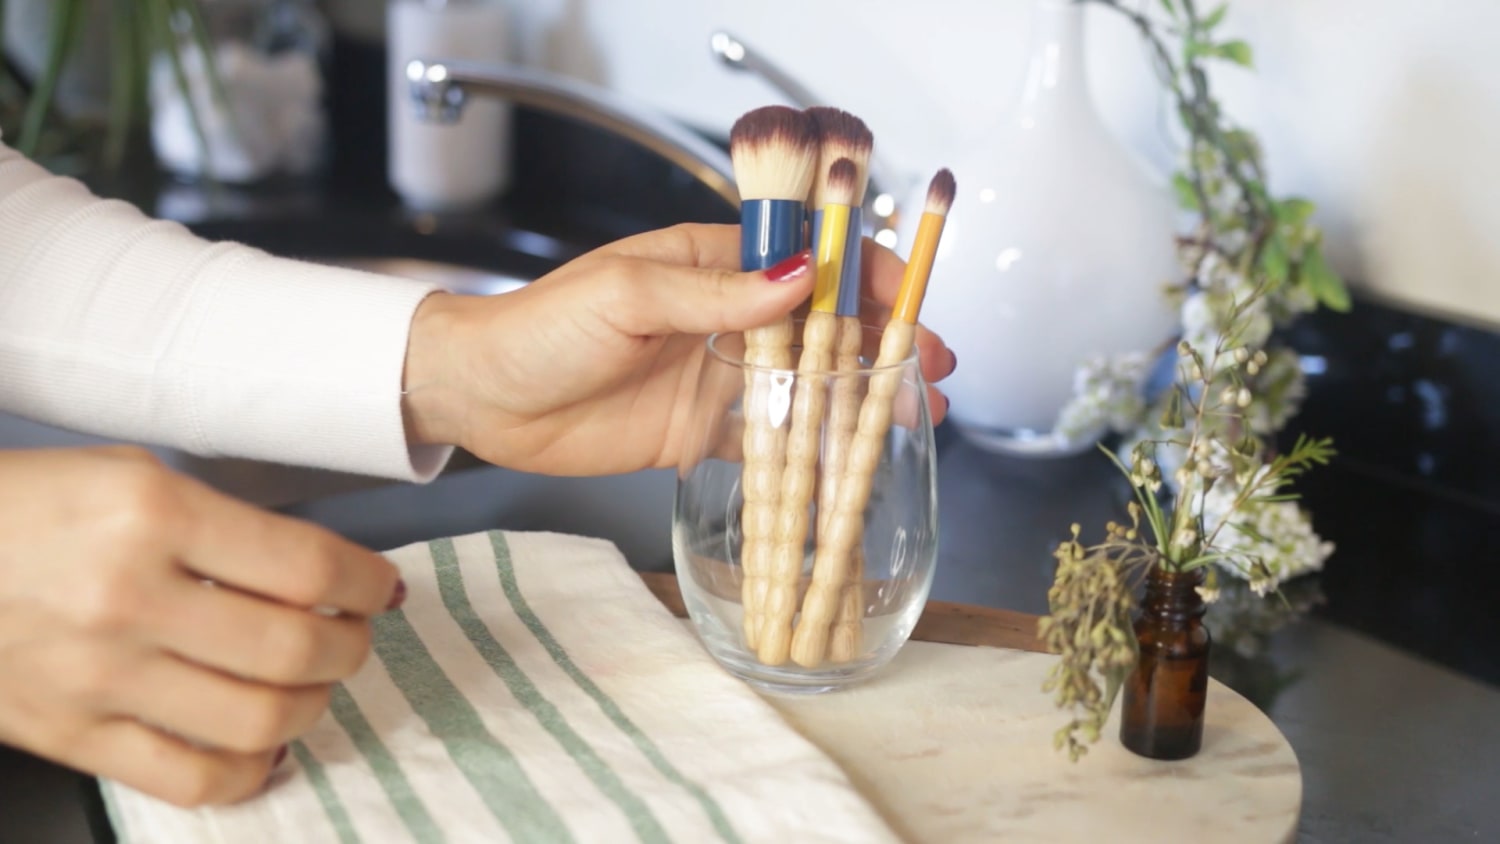 The Best Way To Clean Makeup Brushes